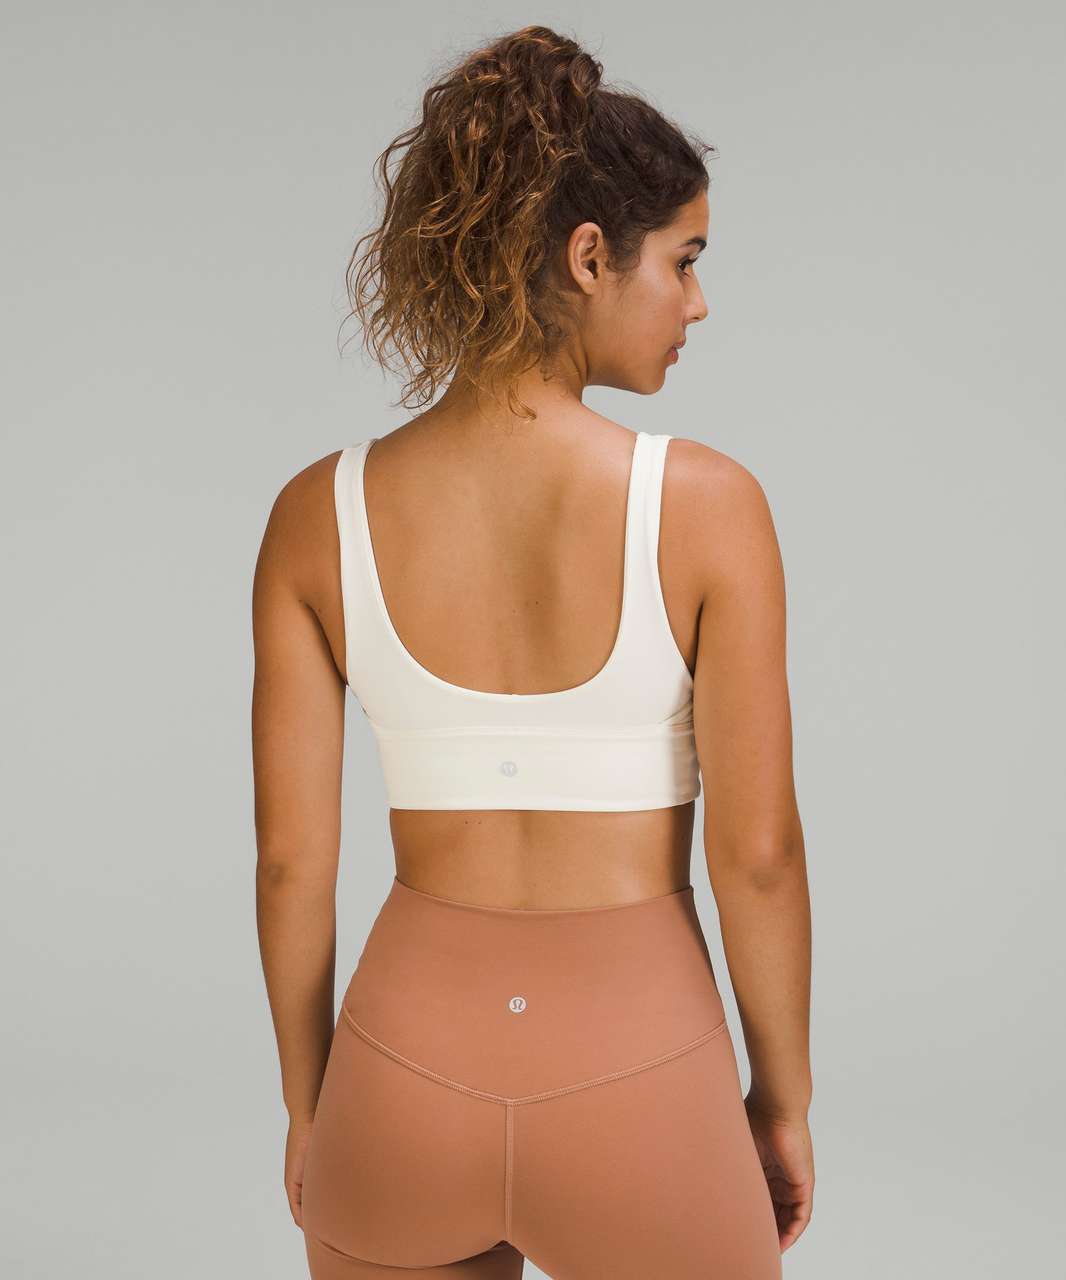 Lulu Lemon launches new 'air support' sports bra meant to be the